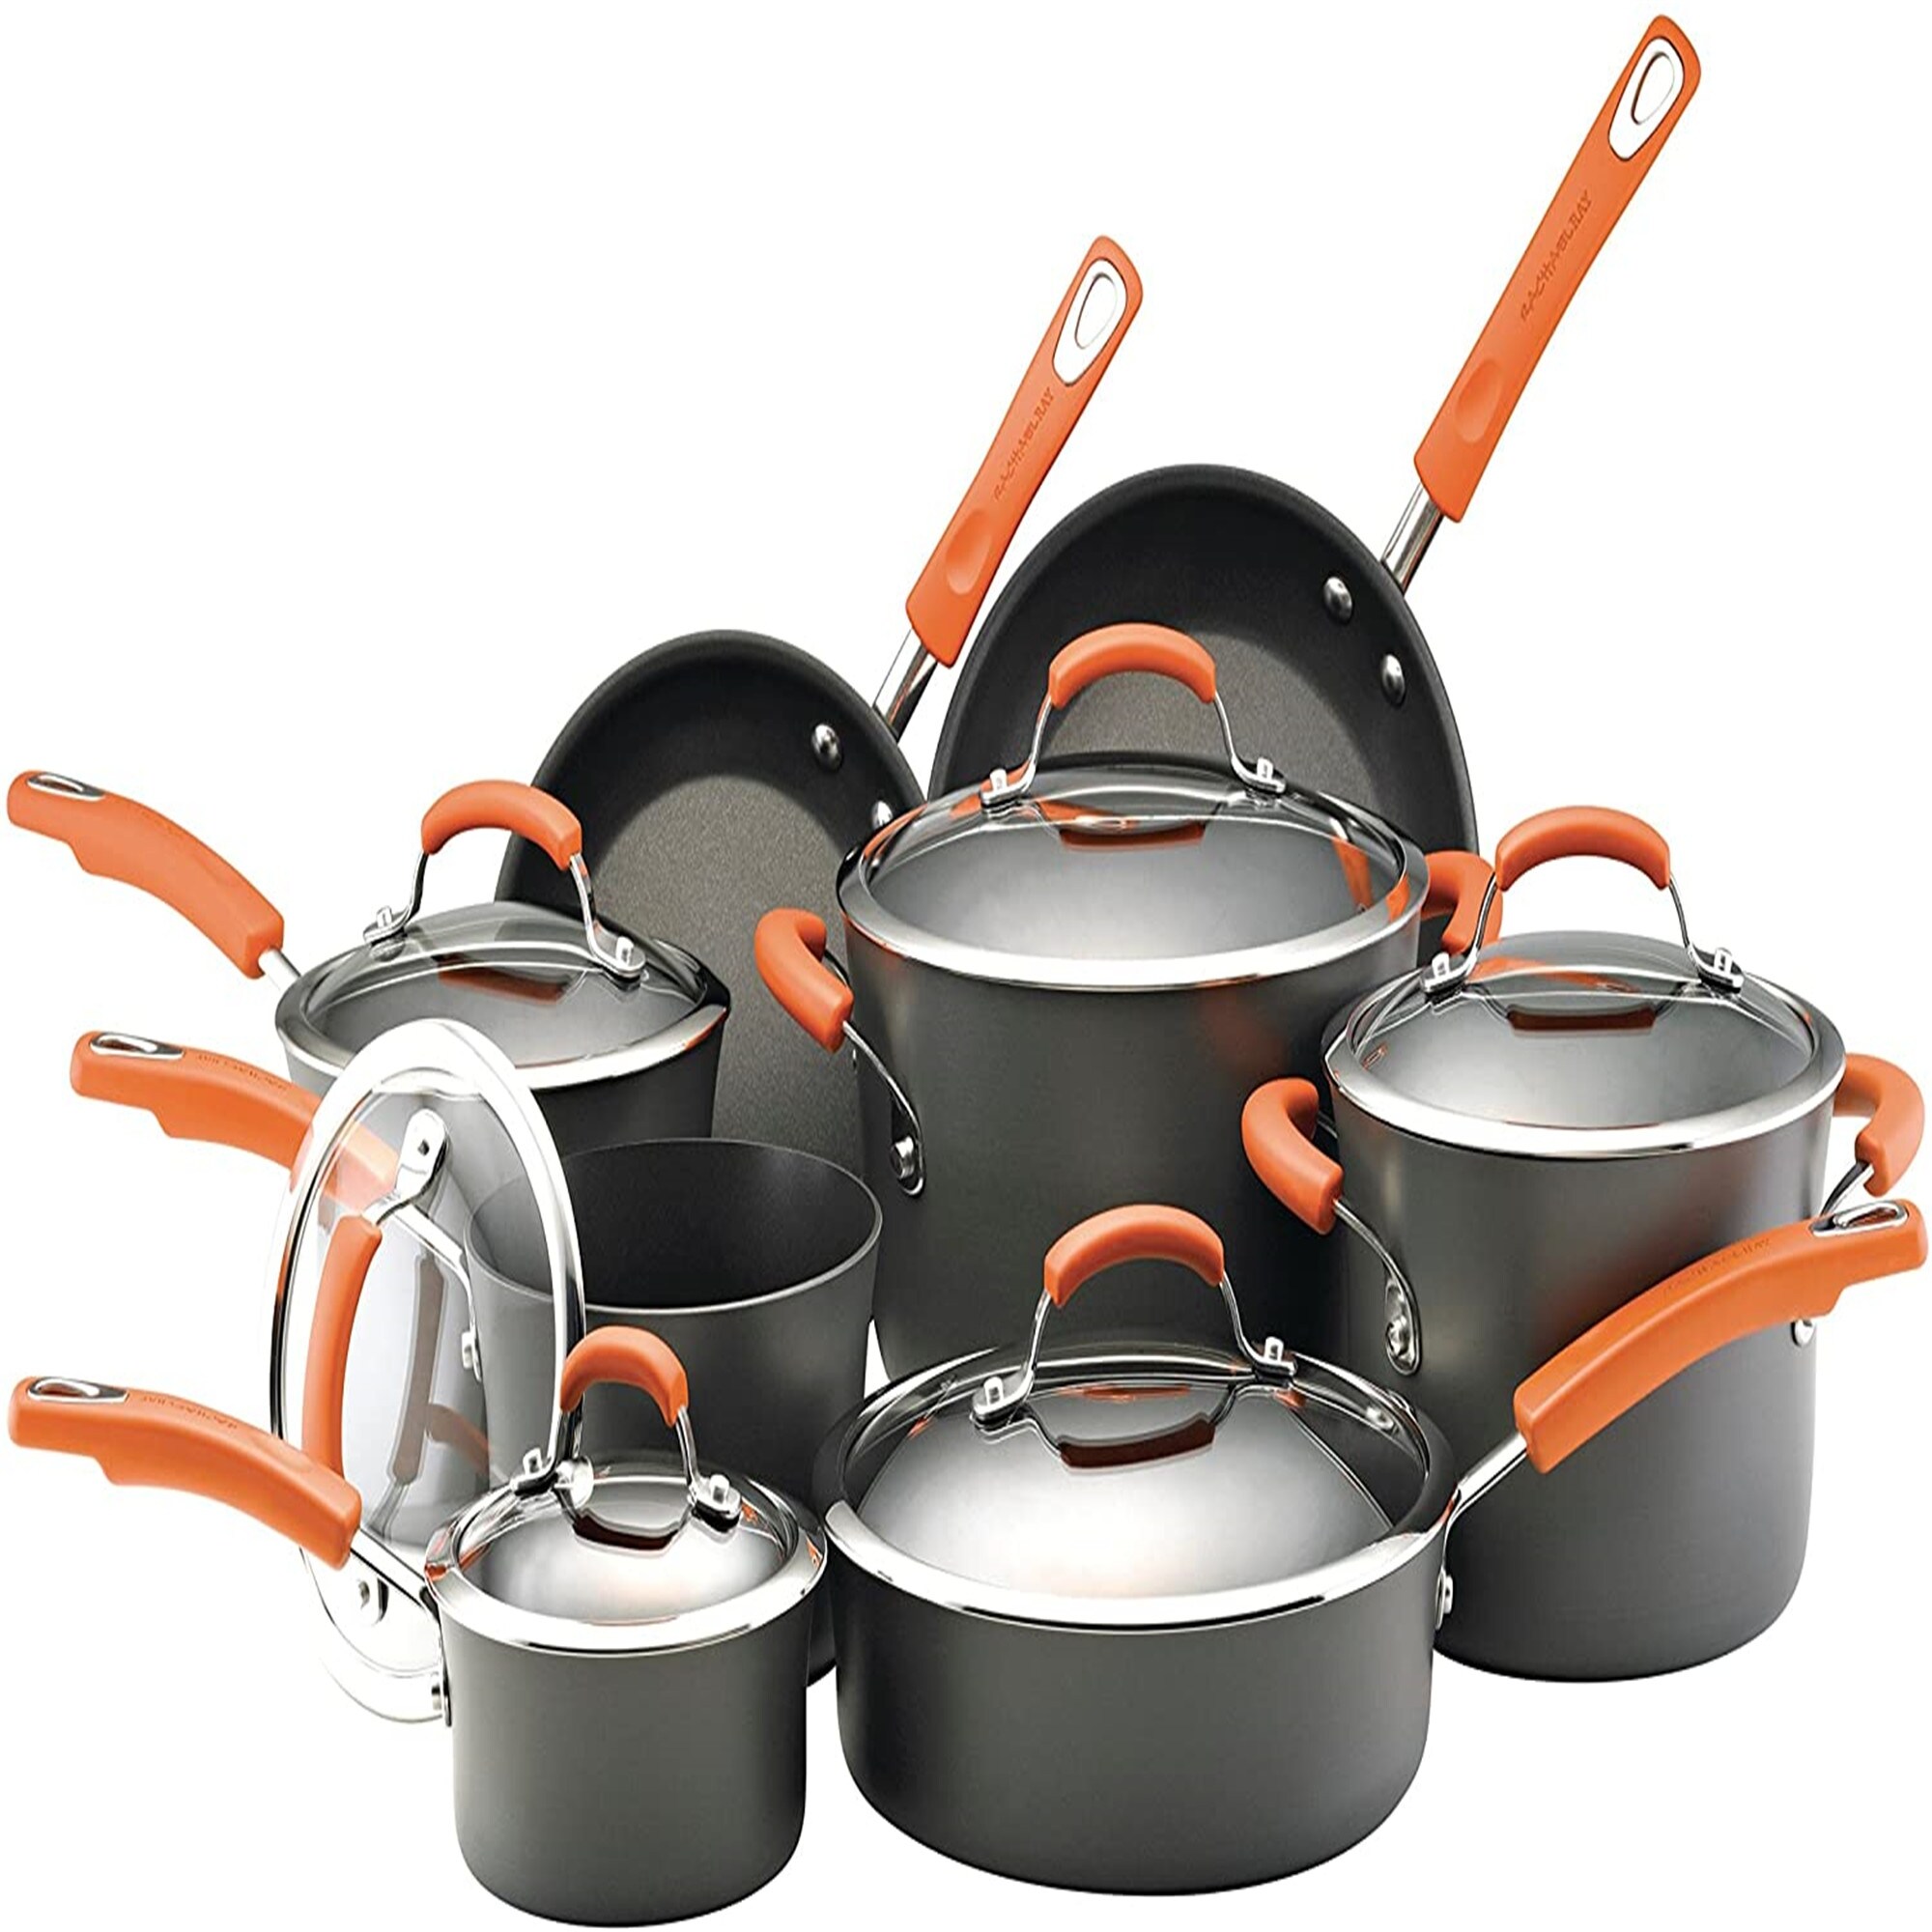 https://ak1.ostkcdn.com/images/products/is/images/direct/8ddd42ed0ad972b0cc5c569bad94d4296197815e/Brights-Hard-Anodized-Nonstick-Cookware-Pots-and-Pans-Set%2C-14-Piece%2C-Gray-with-Orange-Handles.jpg